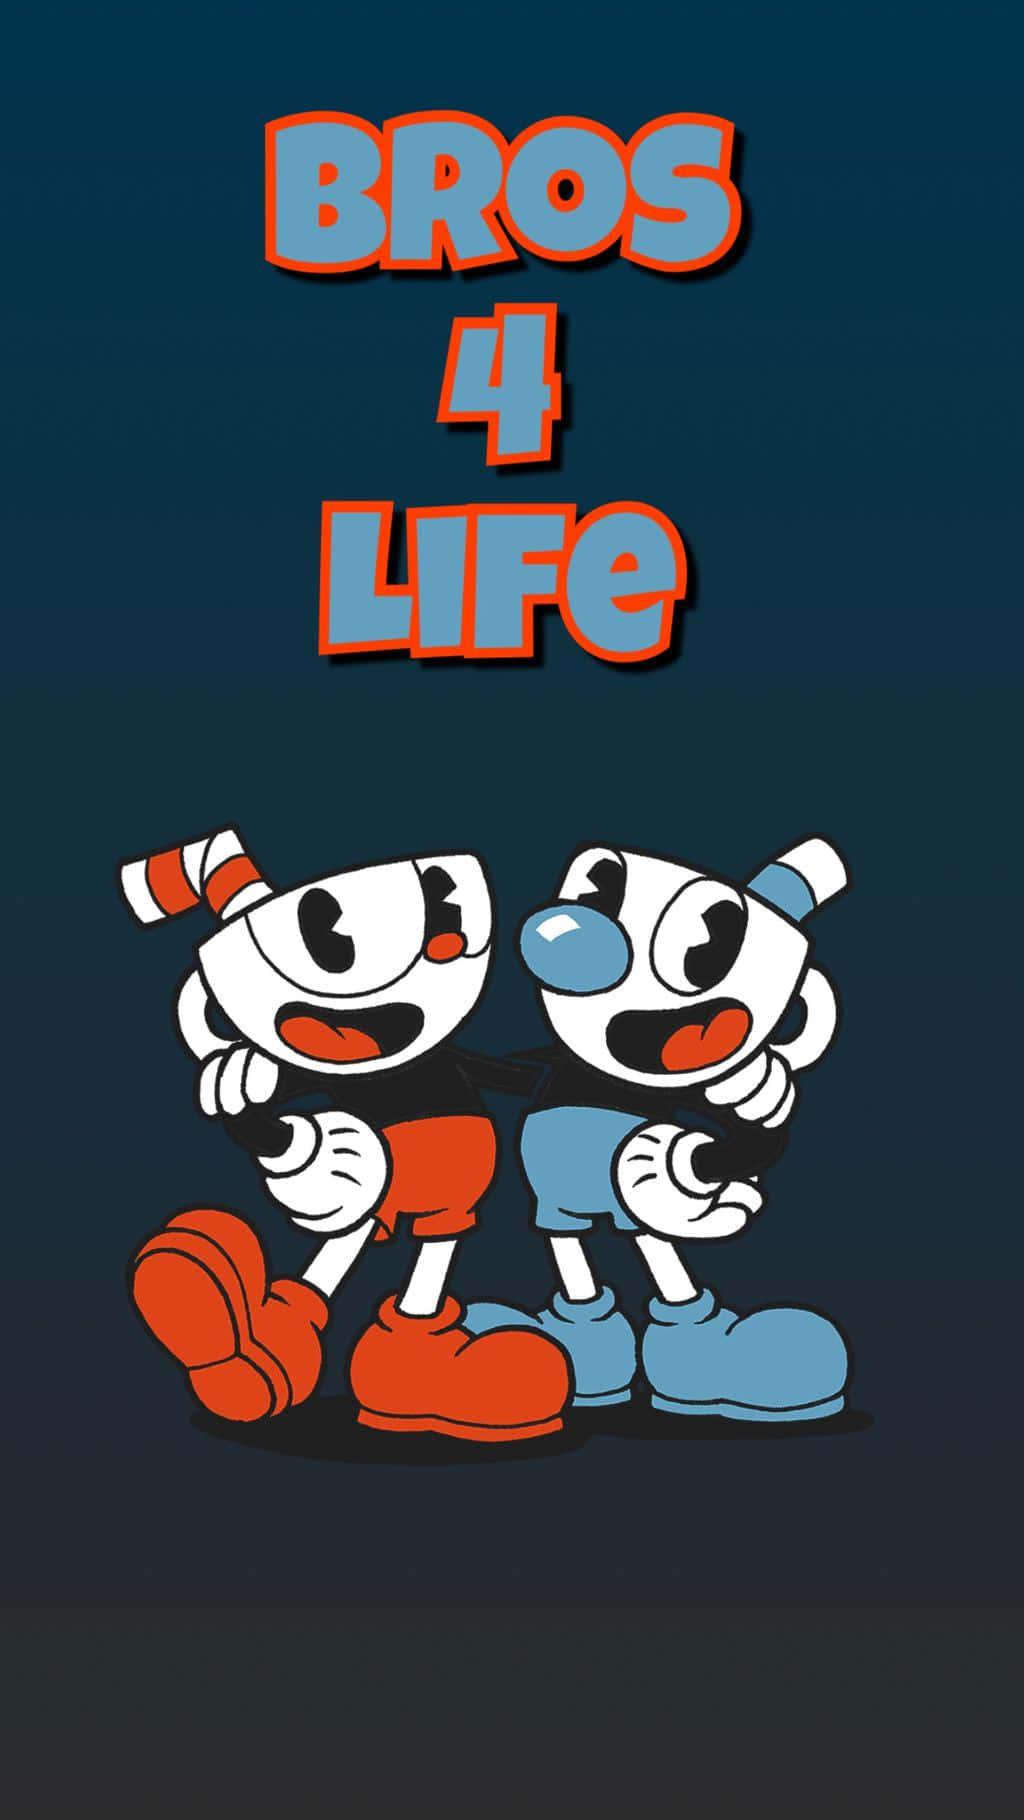 Join Cuphead On An Adventure Through Inkwell Isles